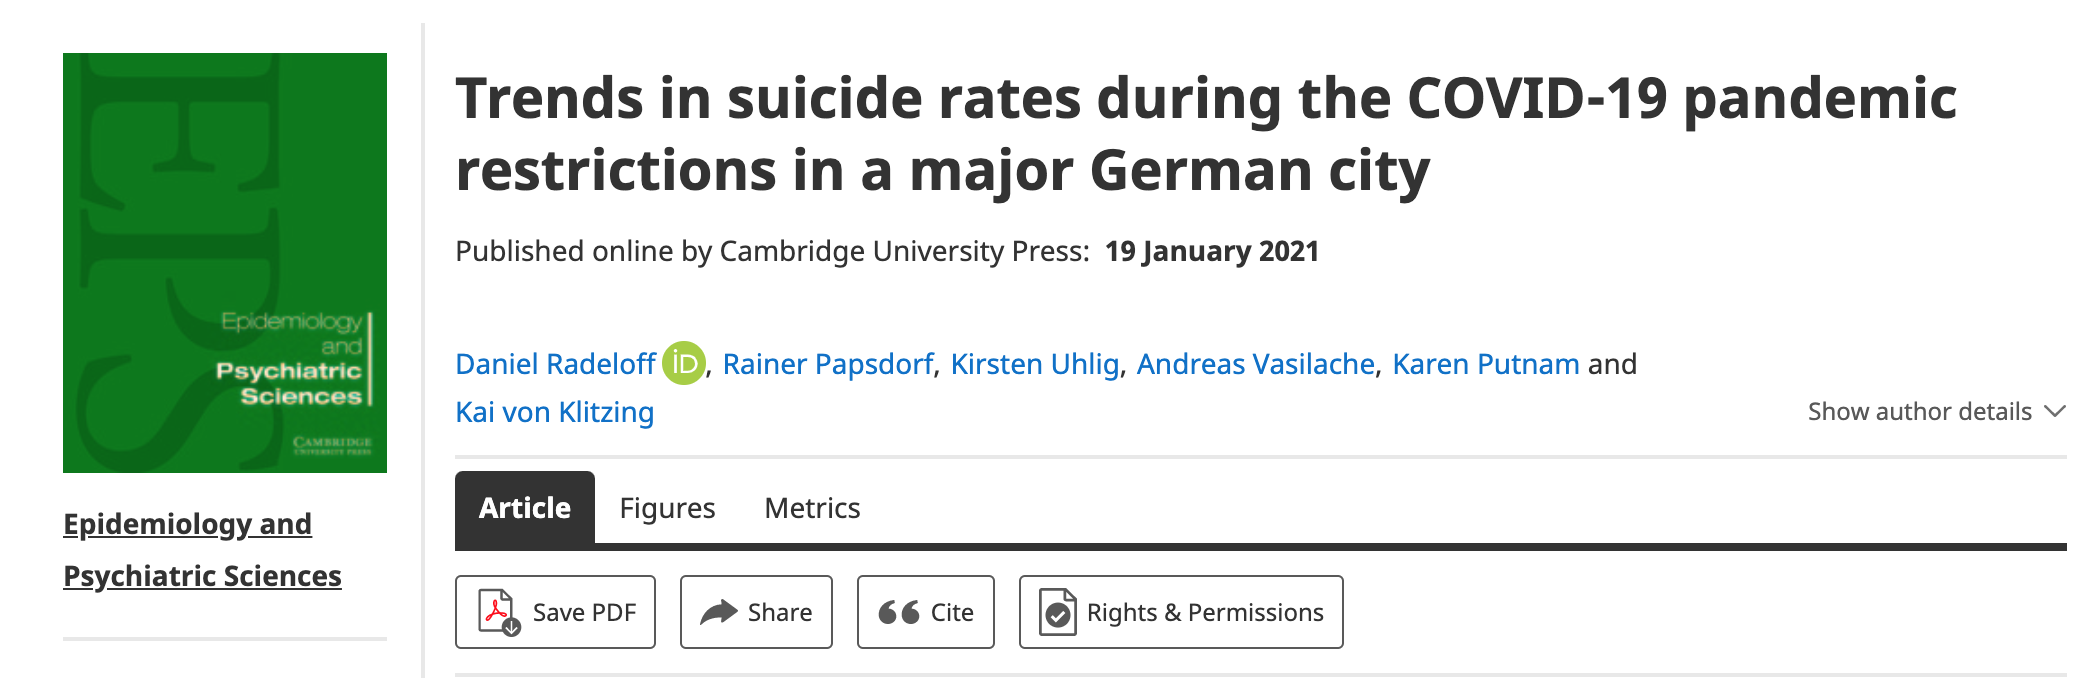 Trends in suicide rates during the COVID19 pandemic restrictions in a major German city